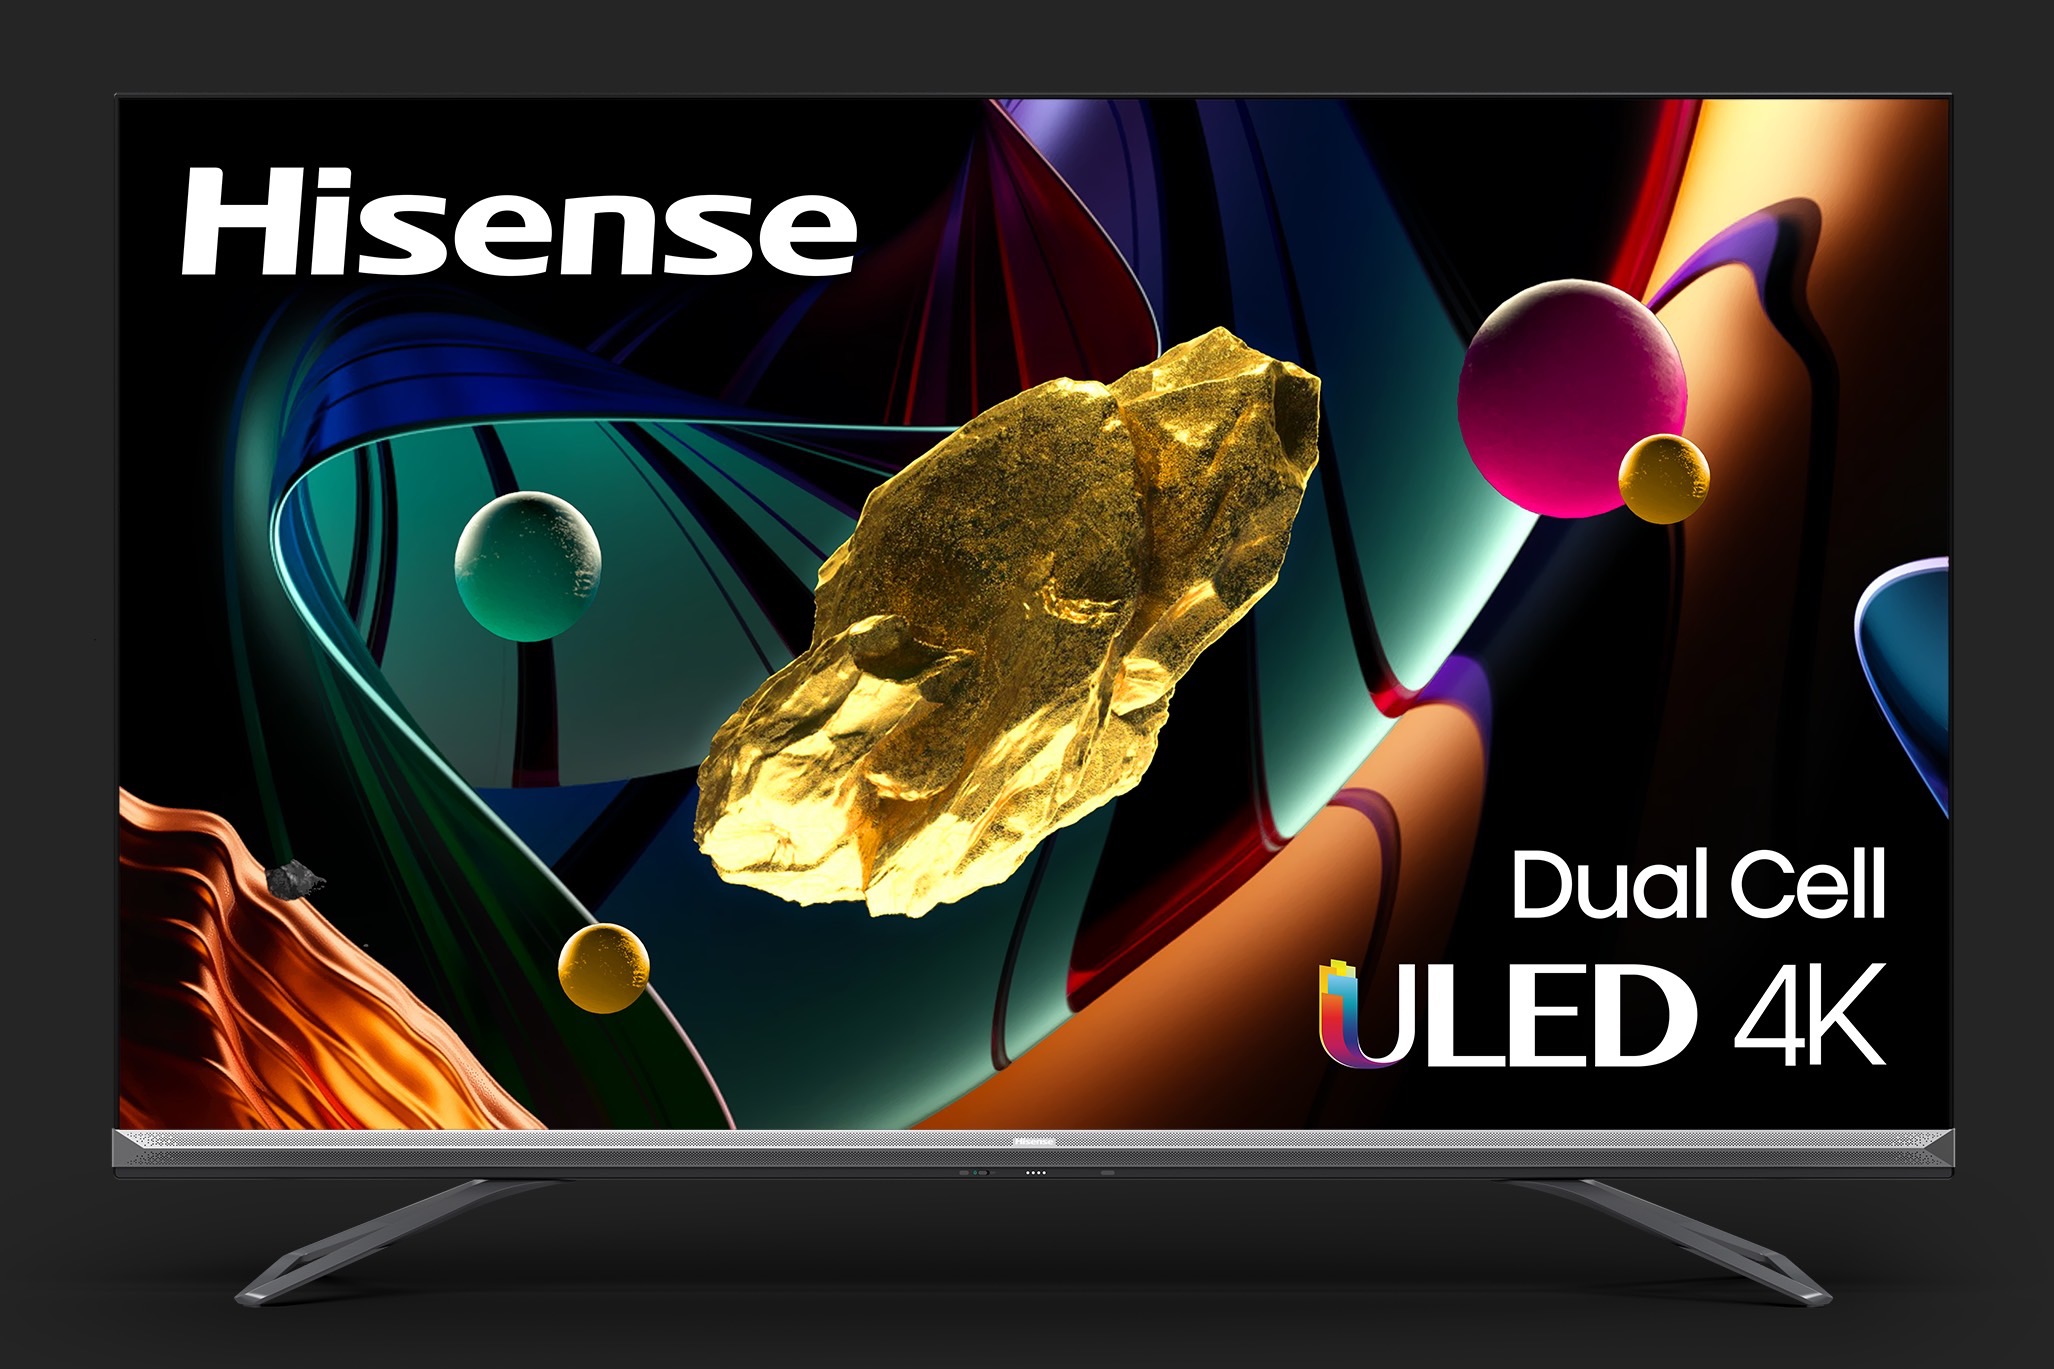 Hisense jumps to Global No 2 TV brand. Launches two new future